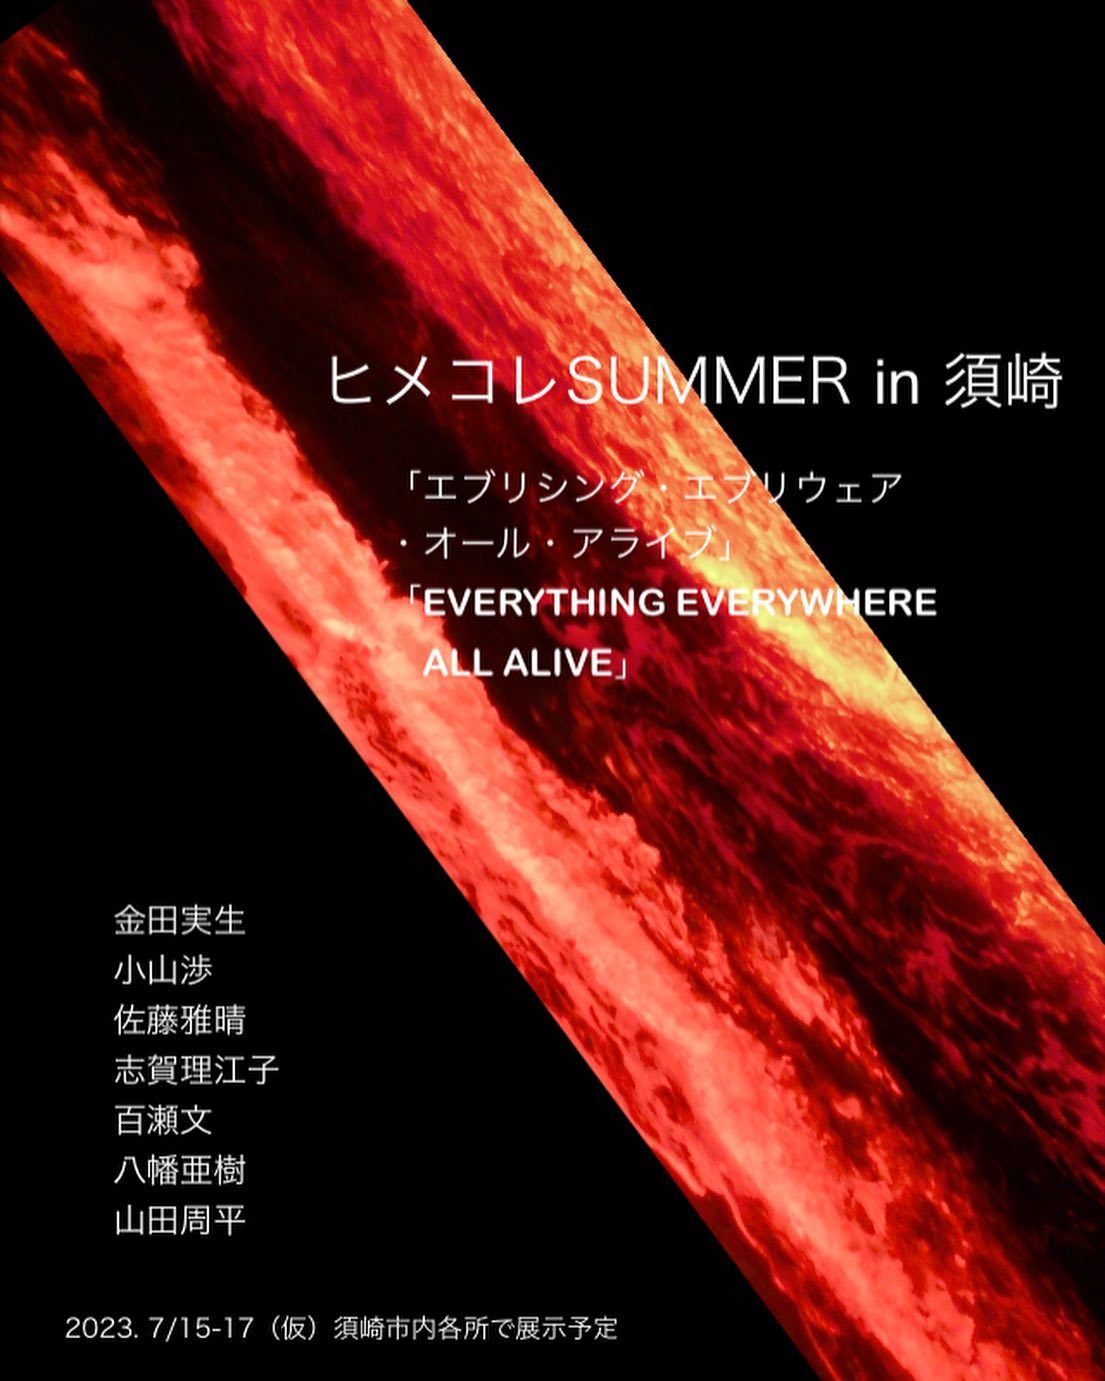 %e3%83%92%e3%83%a1%e3%82%b3%e3%83%acsummer-in-%e9%a0%88%e5%b4%8e-%e3%80%8ceverything-everywhere-all-alive-%e3%80%8d